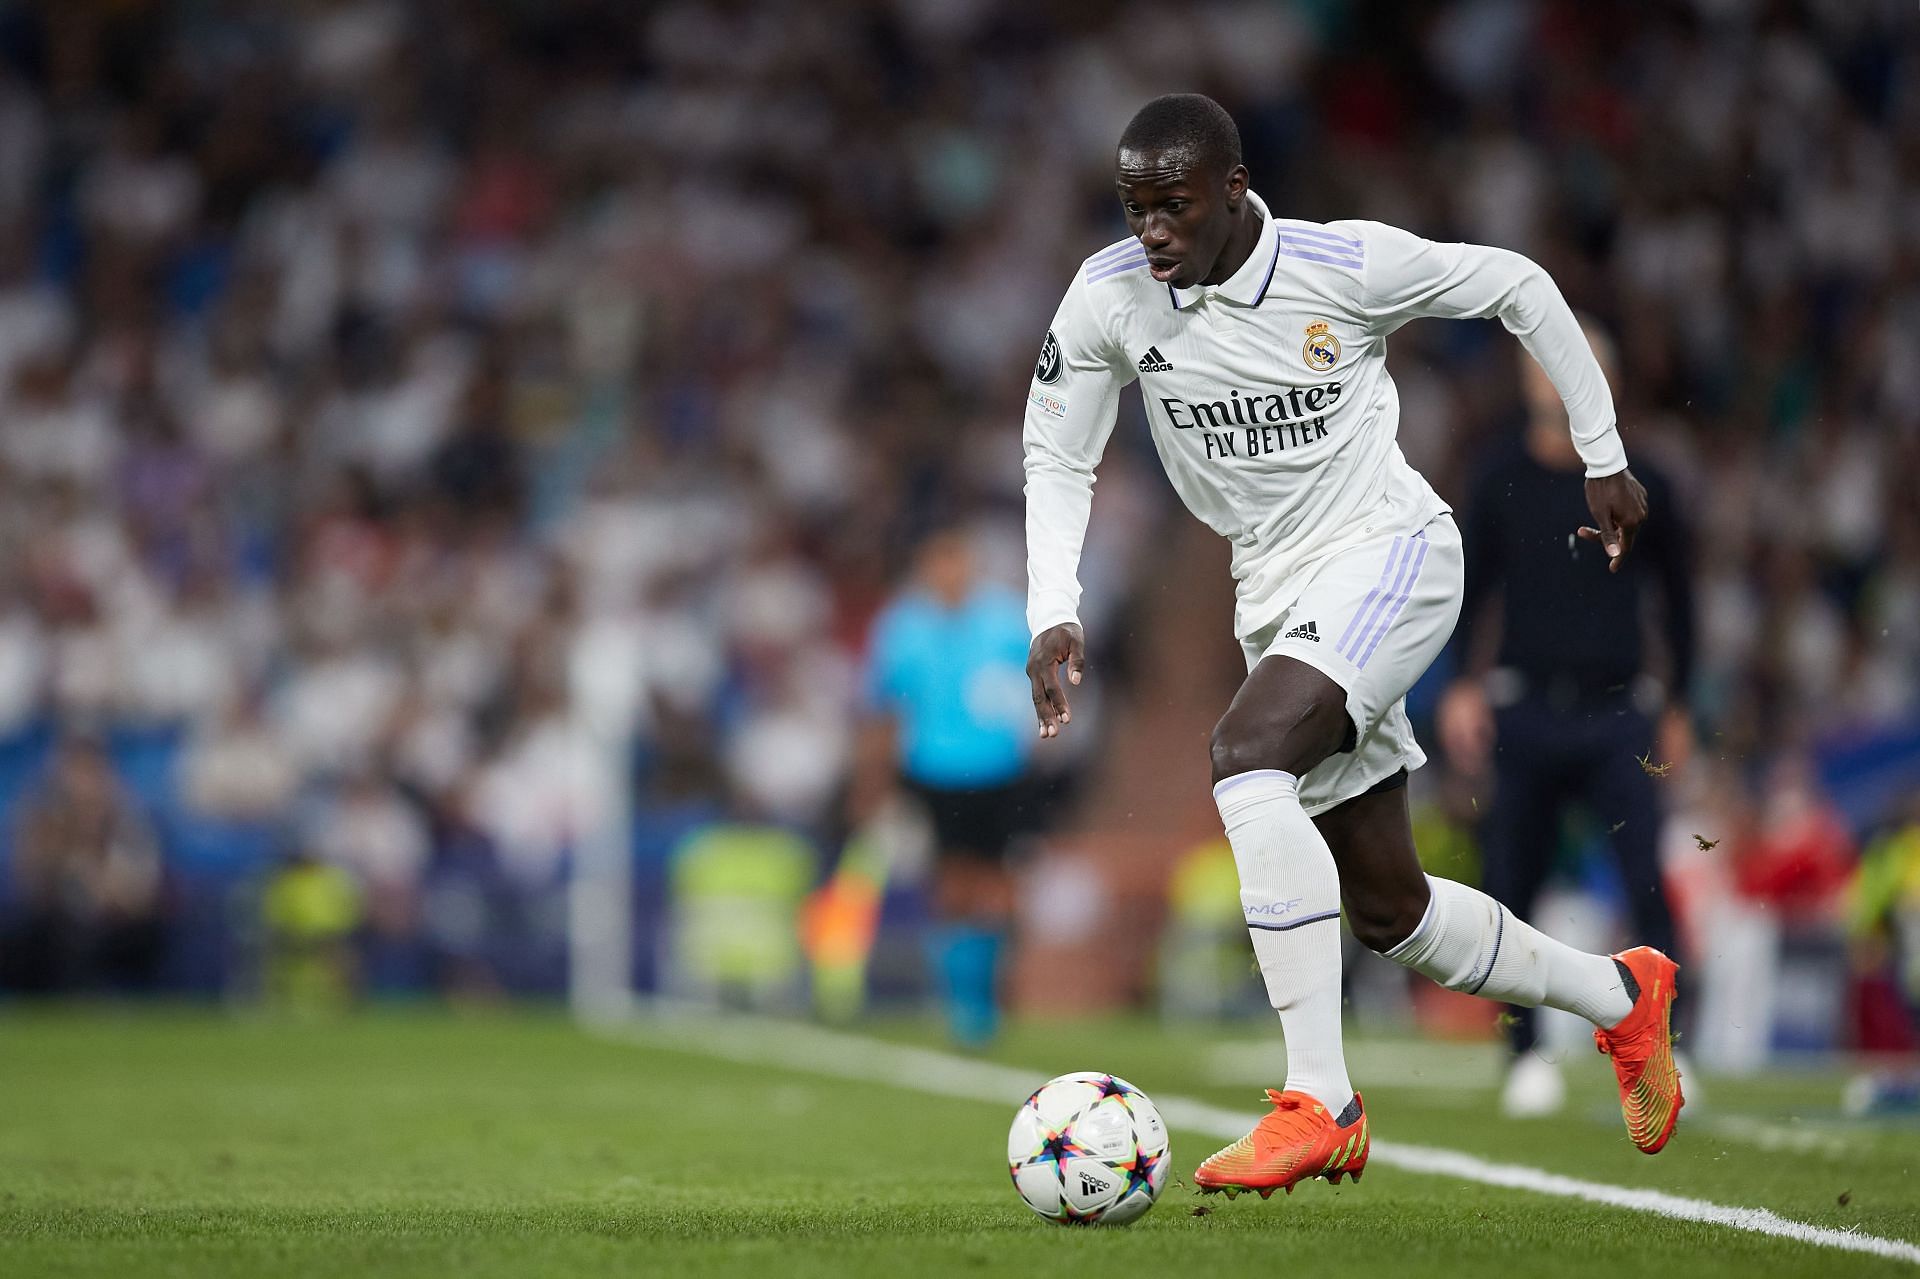 Ferland Mendy could be on his way out of the Santiago Bernabeu this summer.